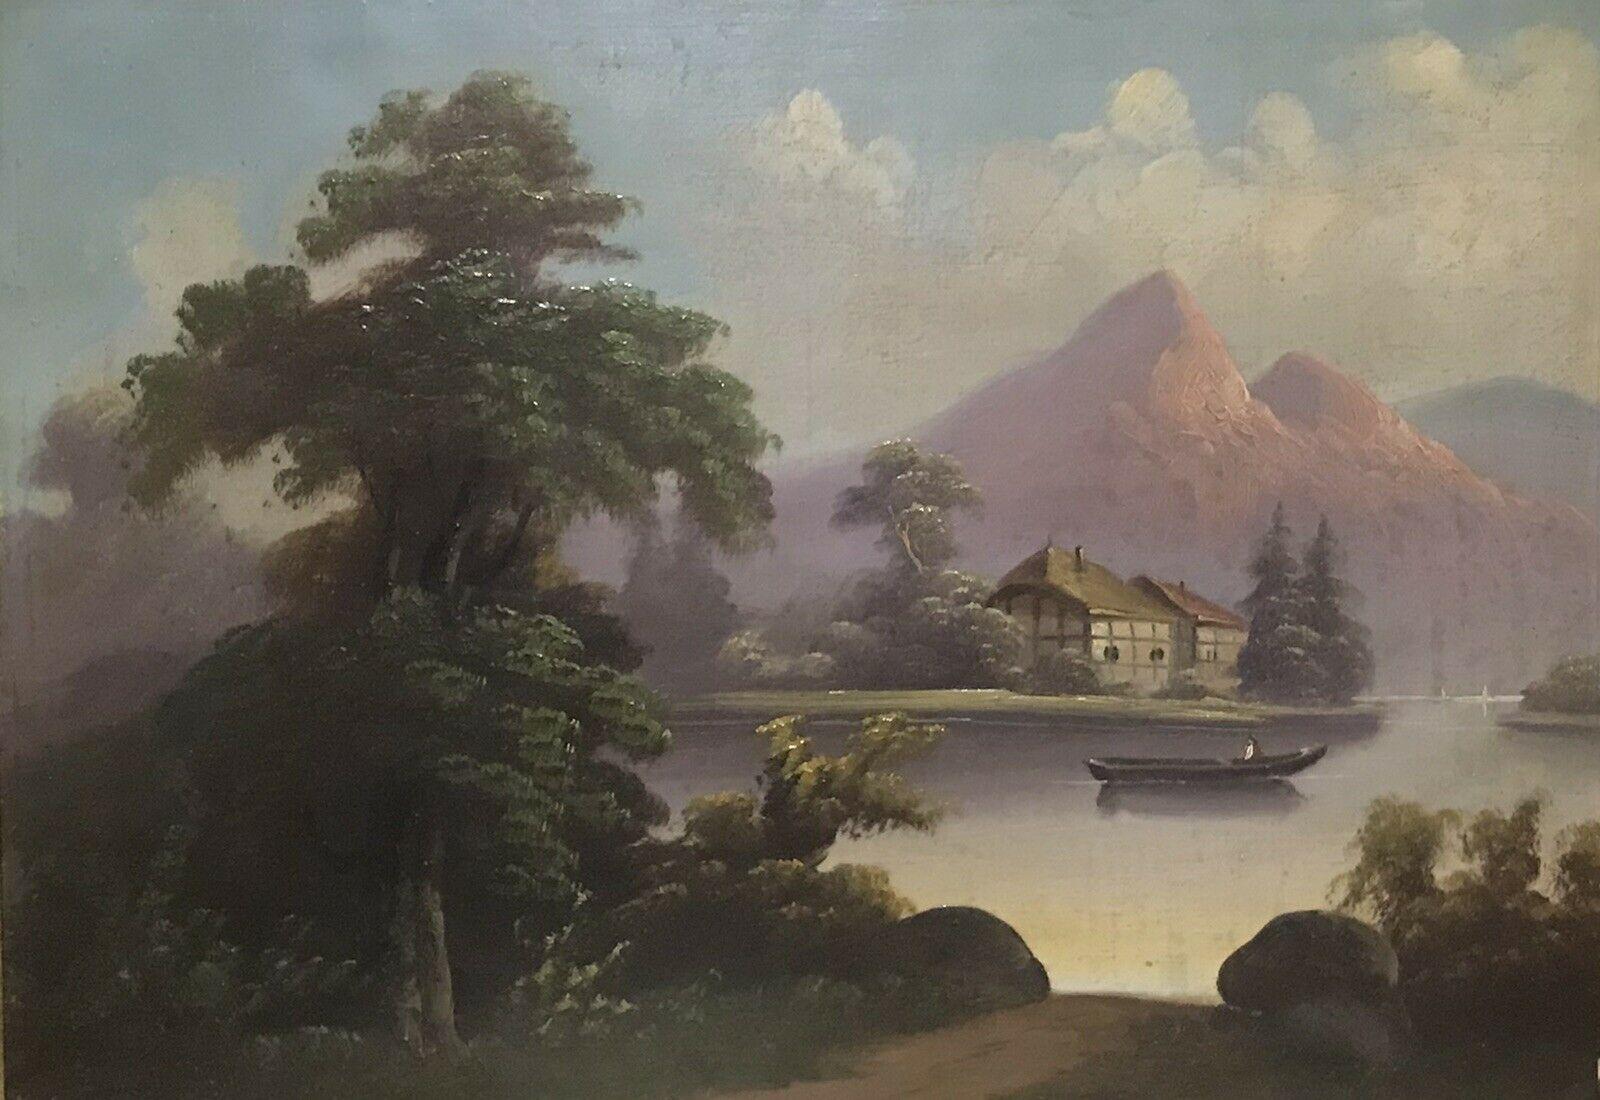 ANTIQUE GERMAN OIL PAINTING ON CANVAS - MOUNTAIN LAKE LANDSCAPE FIGURE IN BOAT - Painting by Unknown